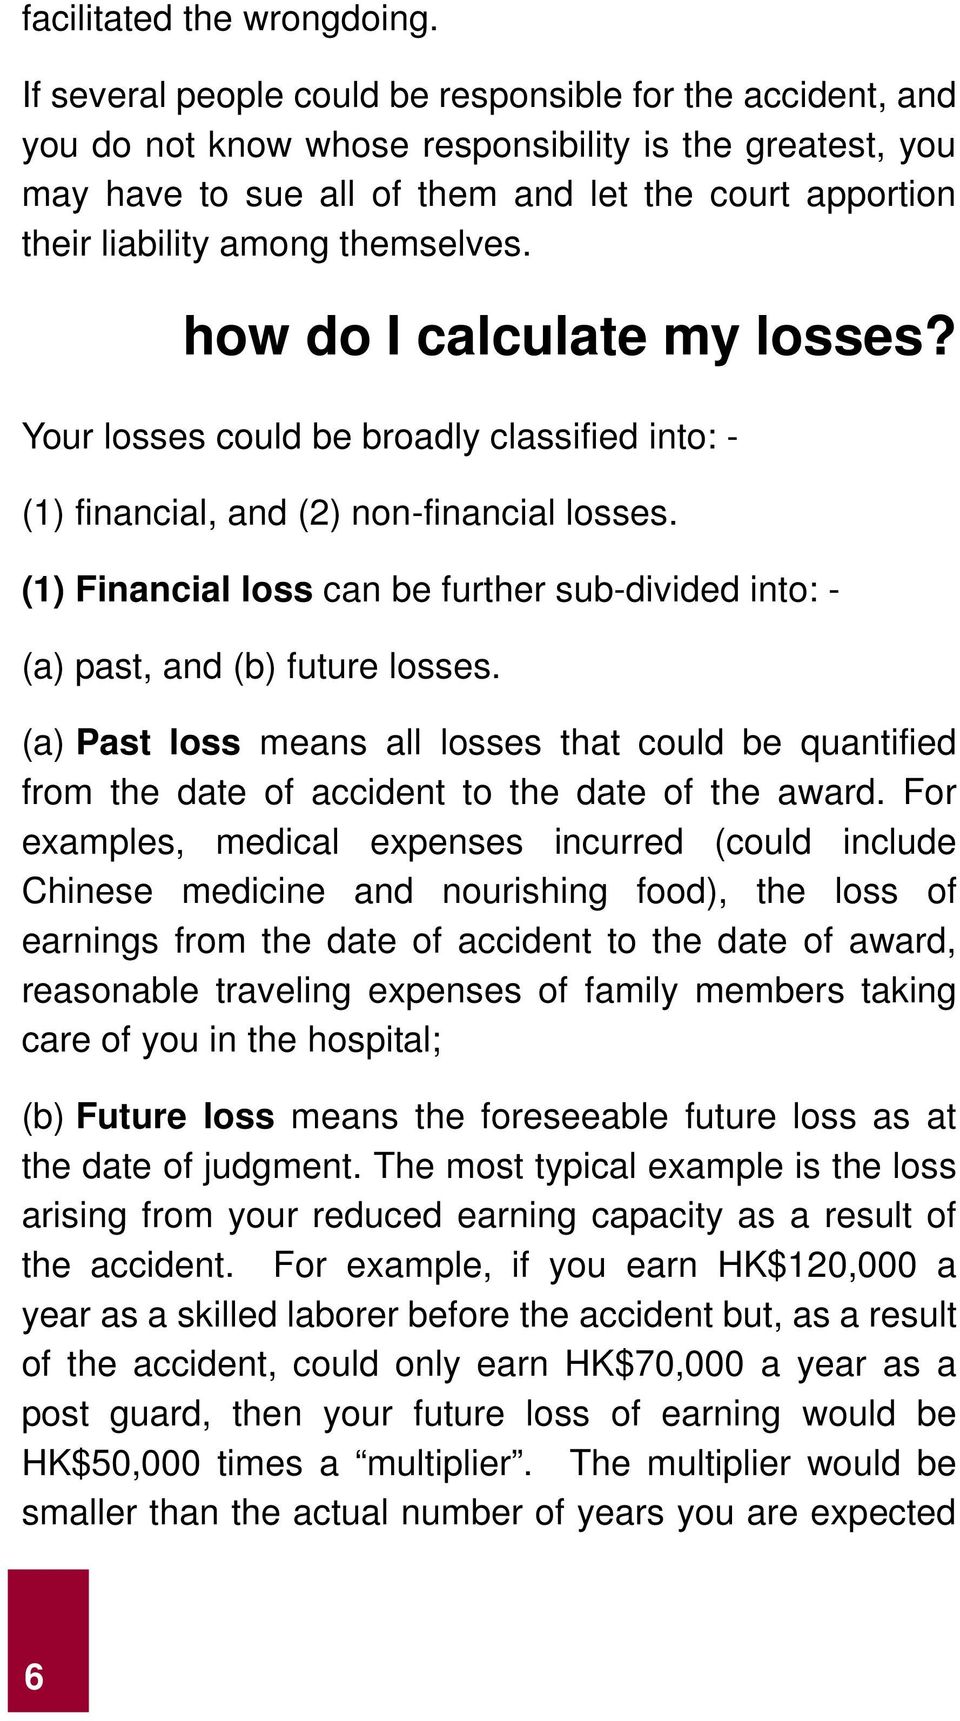 themselves. how do I calculate my losses? Your losses could be broadly classified into: - (1) financial, and (2) non-financial losses.